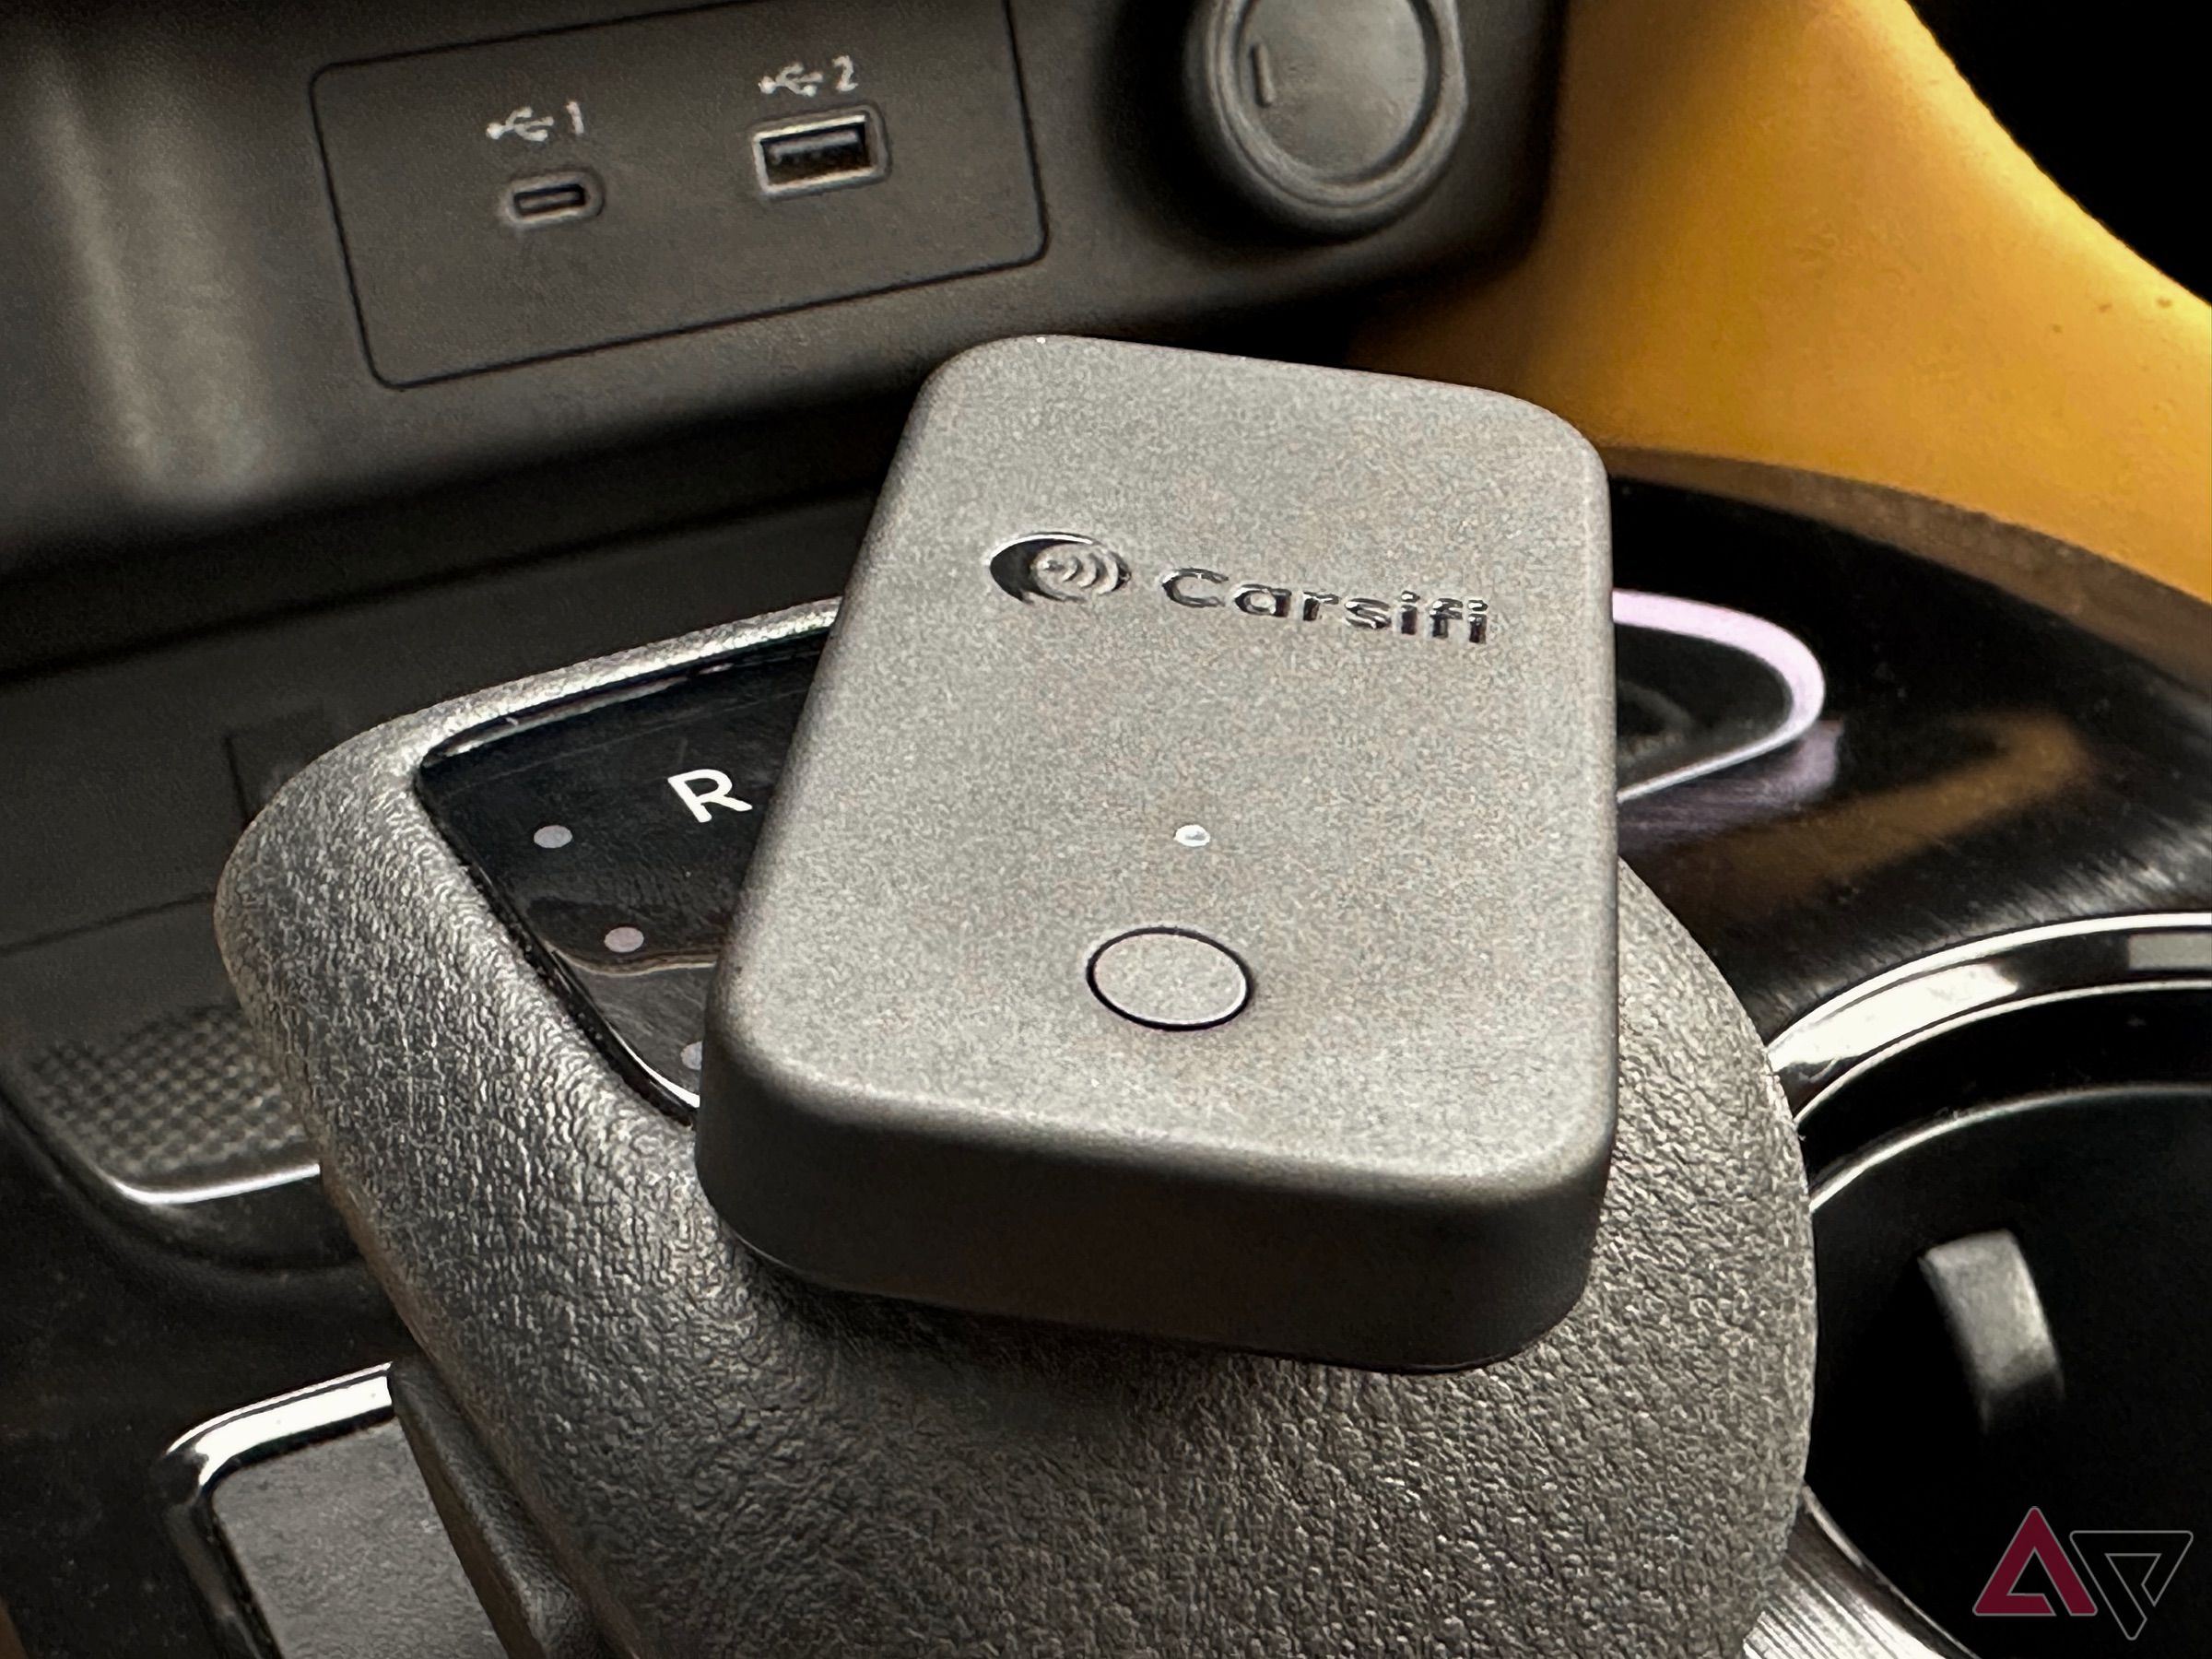 Carsifi Wireless Android Auto Adapter sitting on top of gear shift.